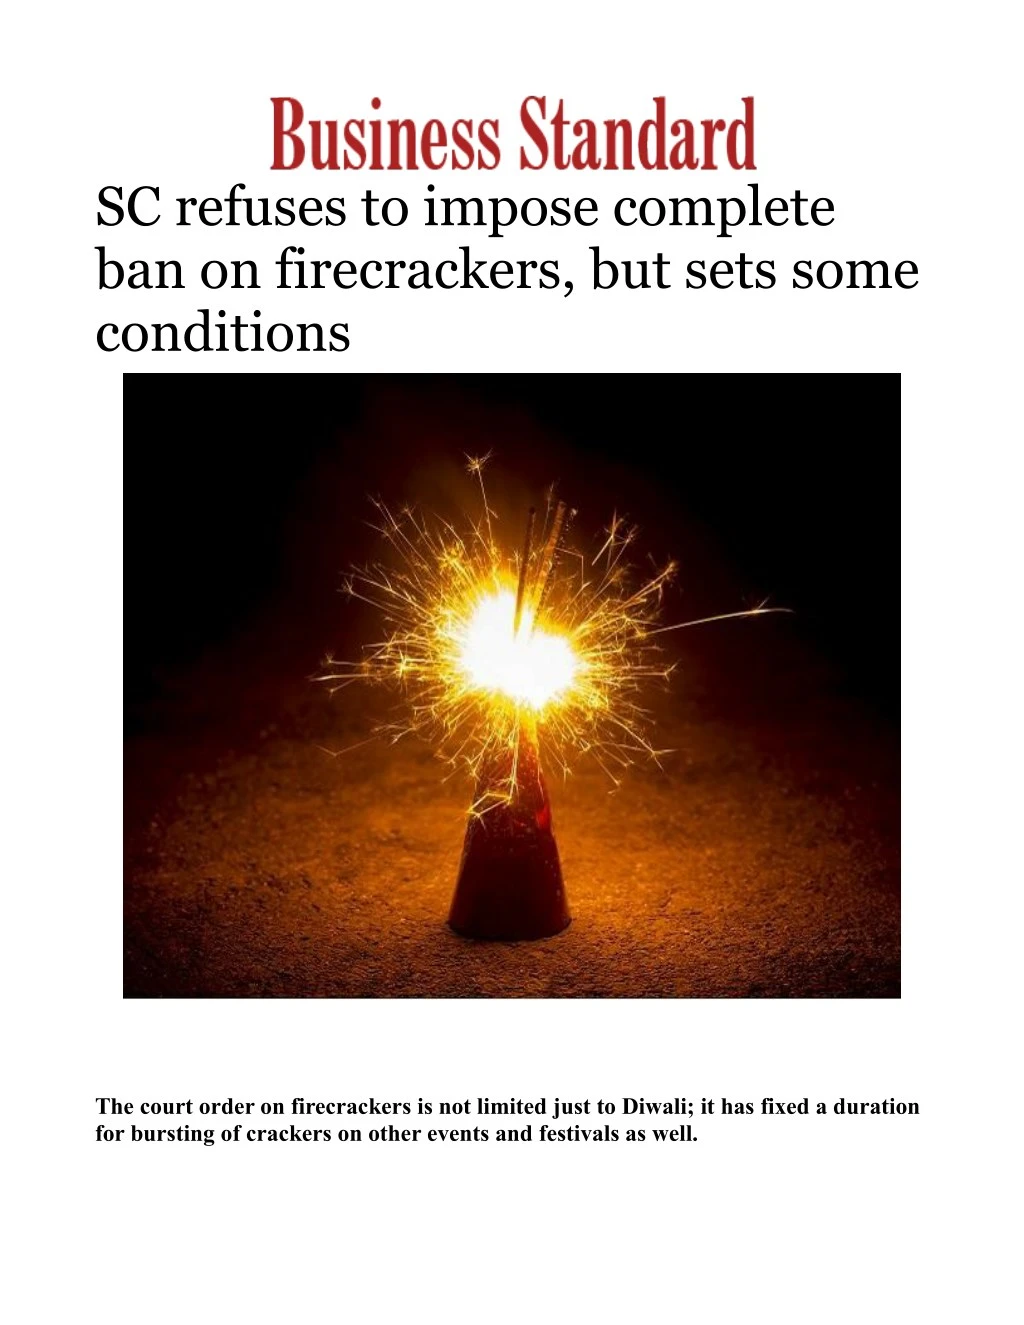 sc refuses to impose complete ban on firecrackers